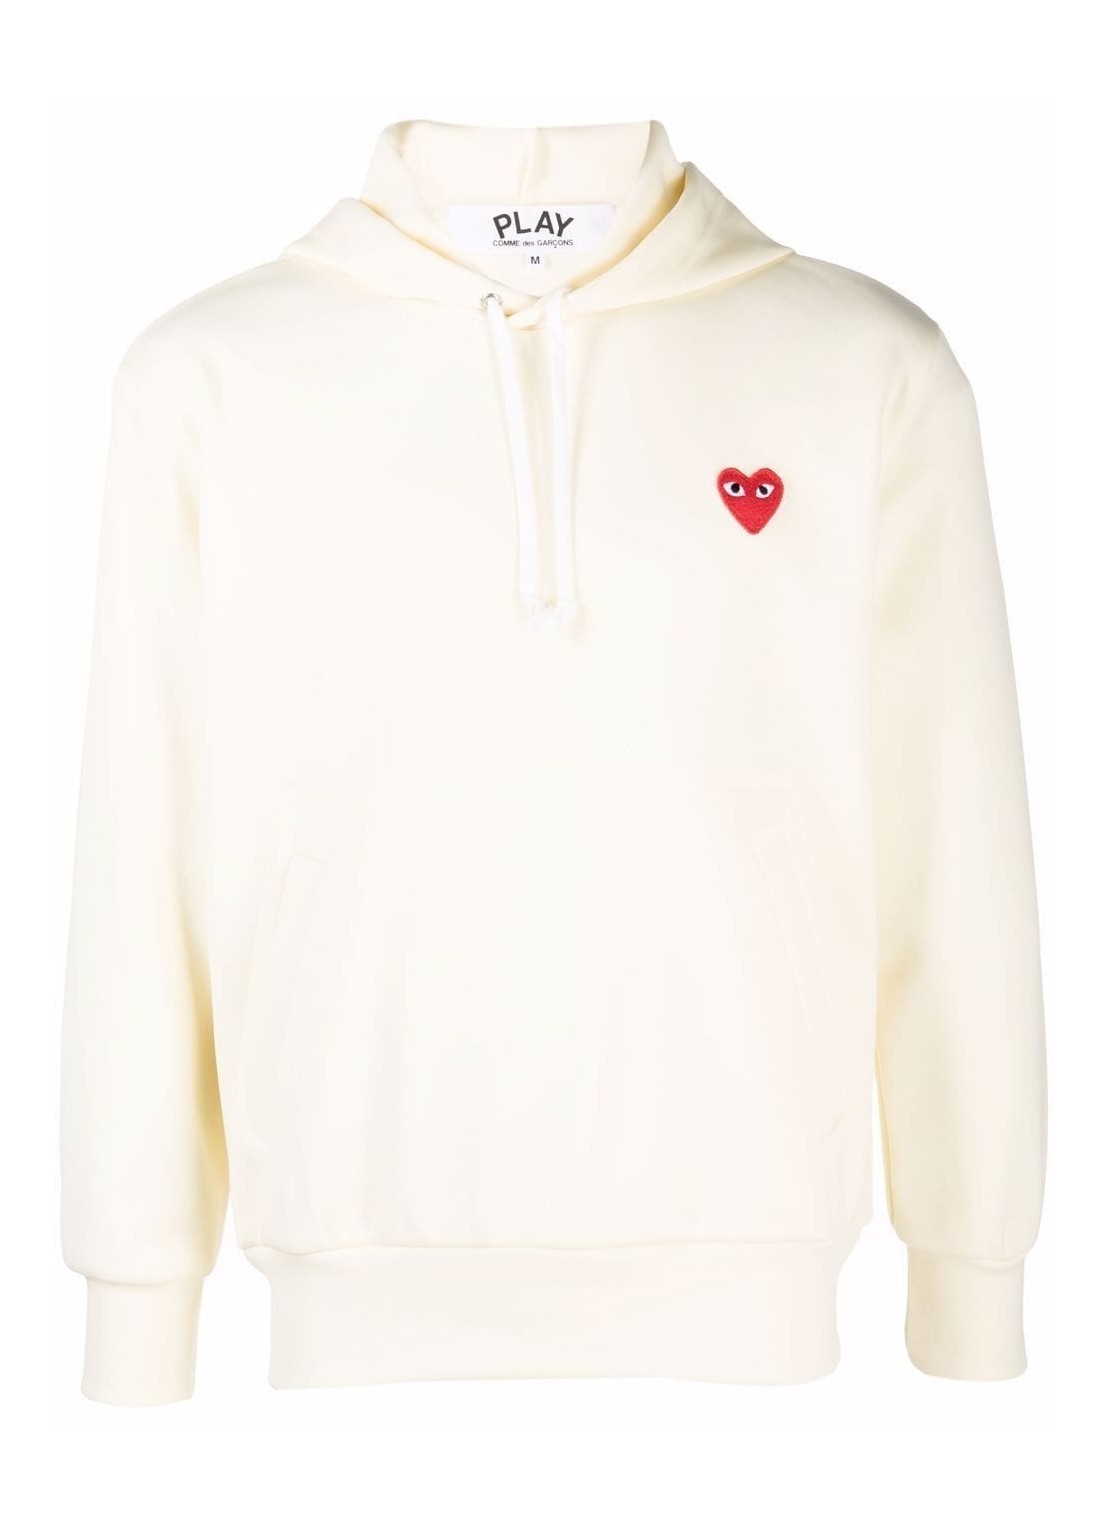 Sudadera comme des garcons sweater man play hooded sweatshirt p1t174 ivory talla S
 